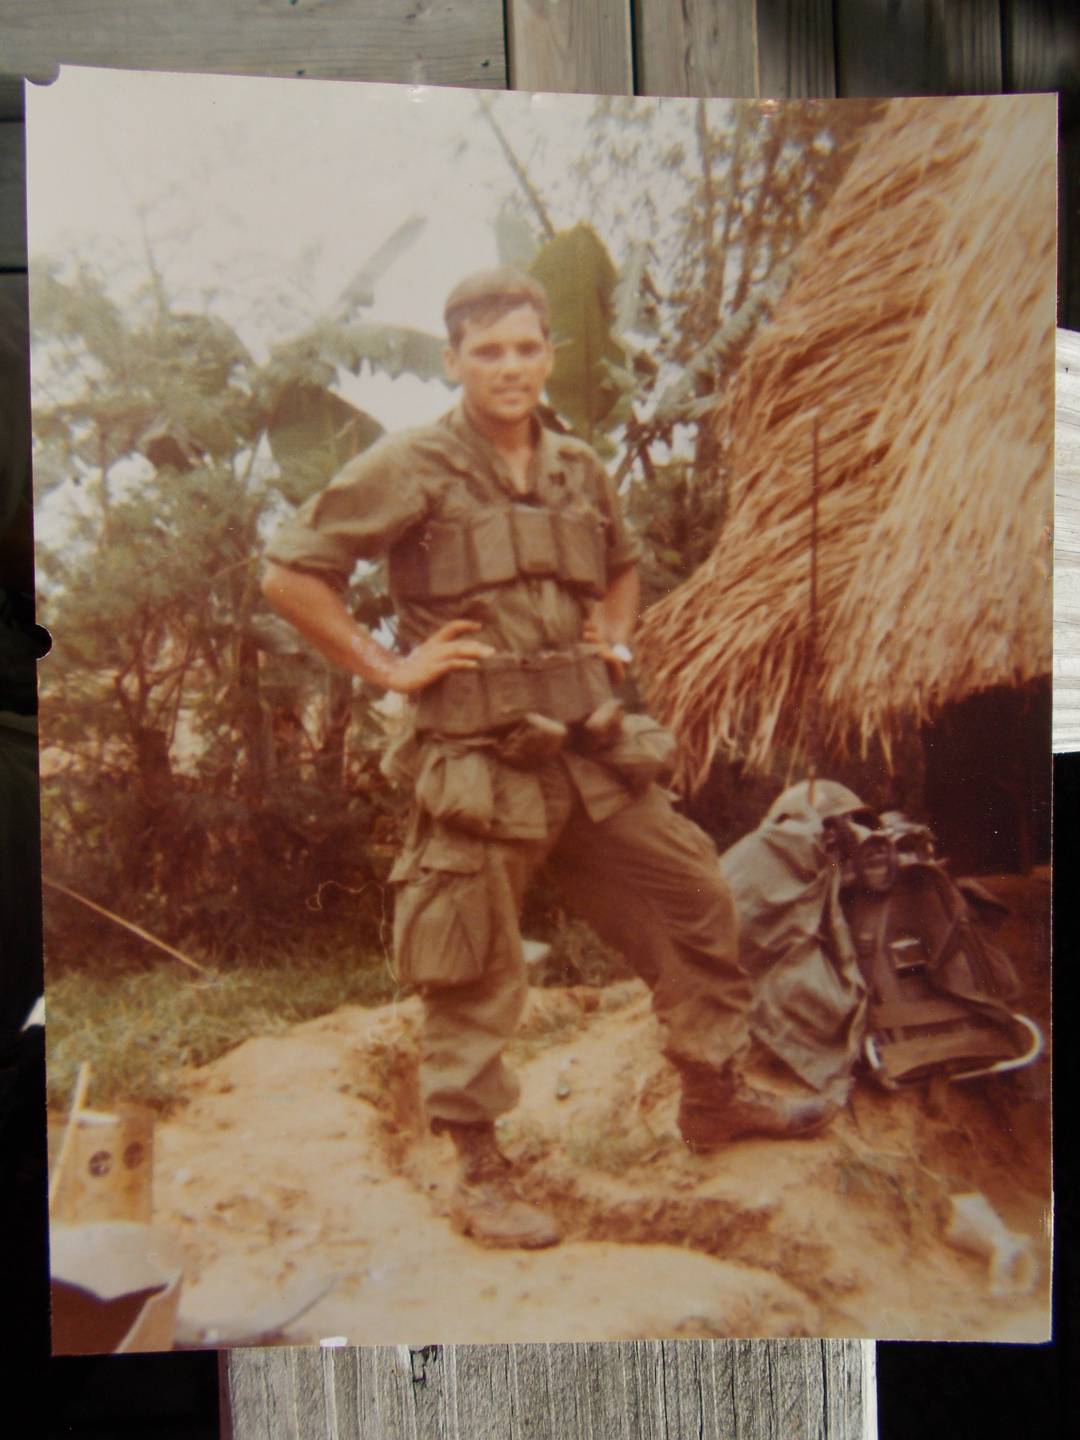 Young U.S. soldier in the jungle, hands on his hips.